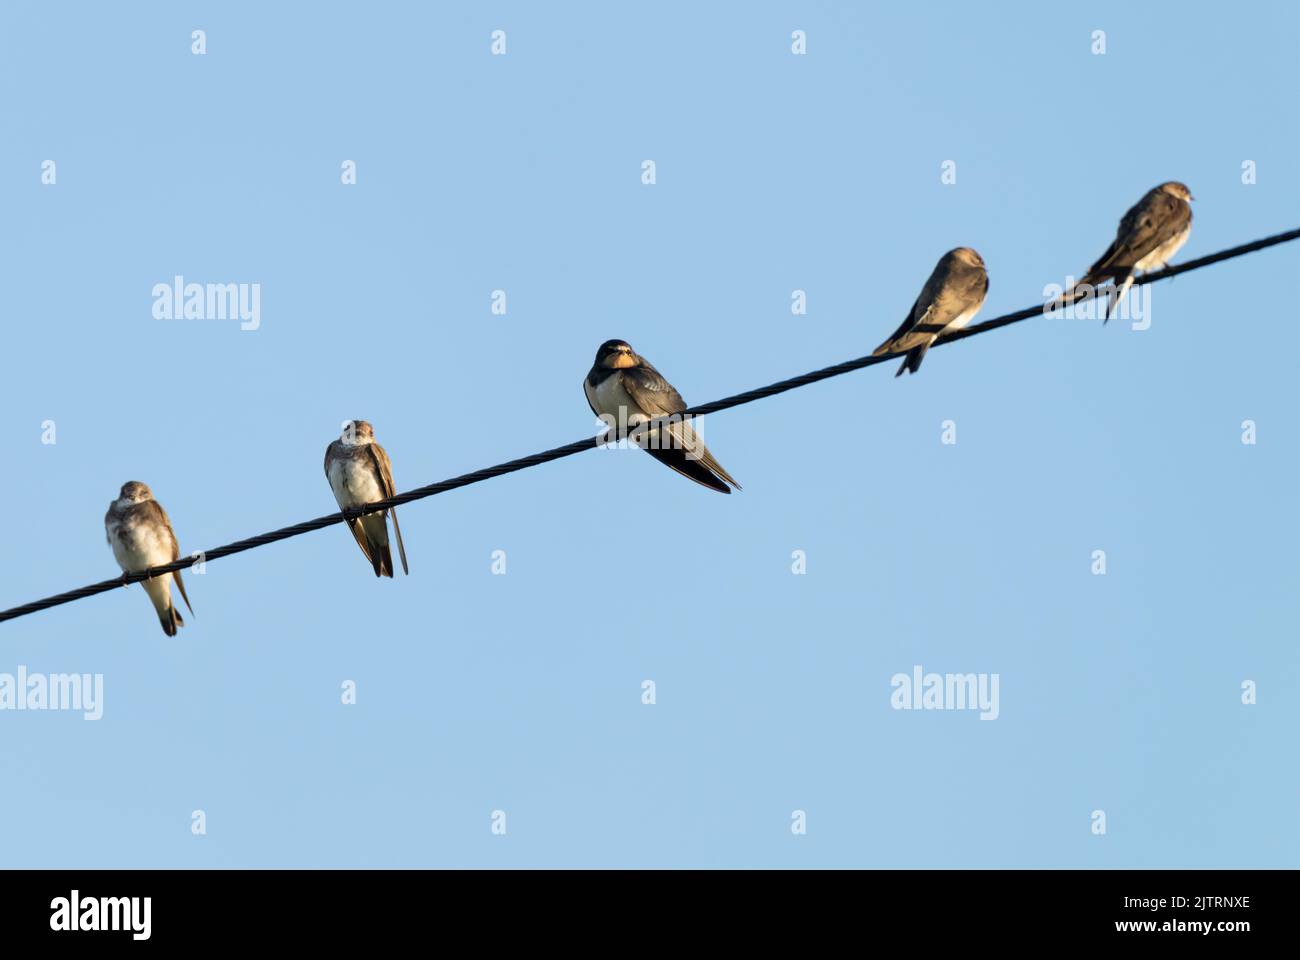 A Swallow (Hirundo rustica) perched on a telephone wire between four young Sand Martins (Riparia riparia), Isle of Mull, Scotland Stock Photo